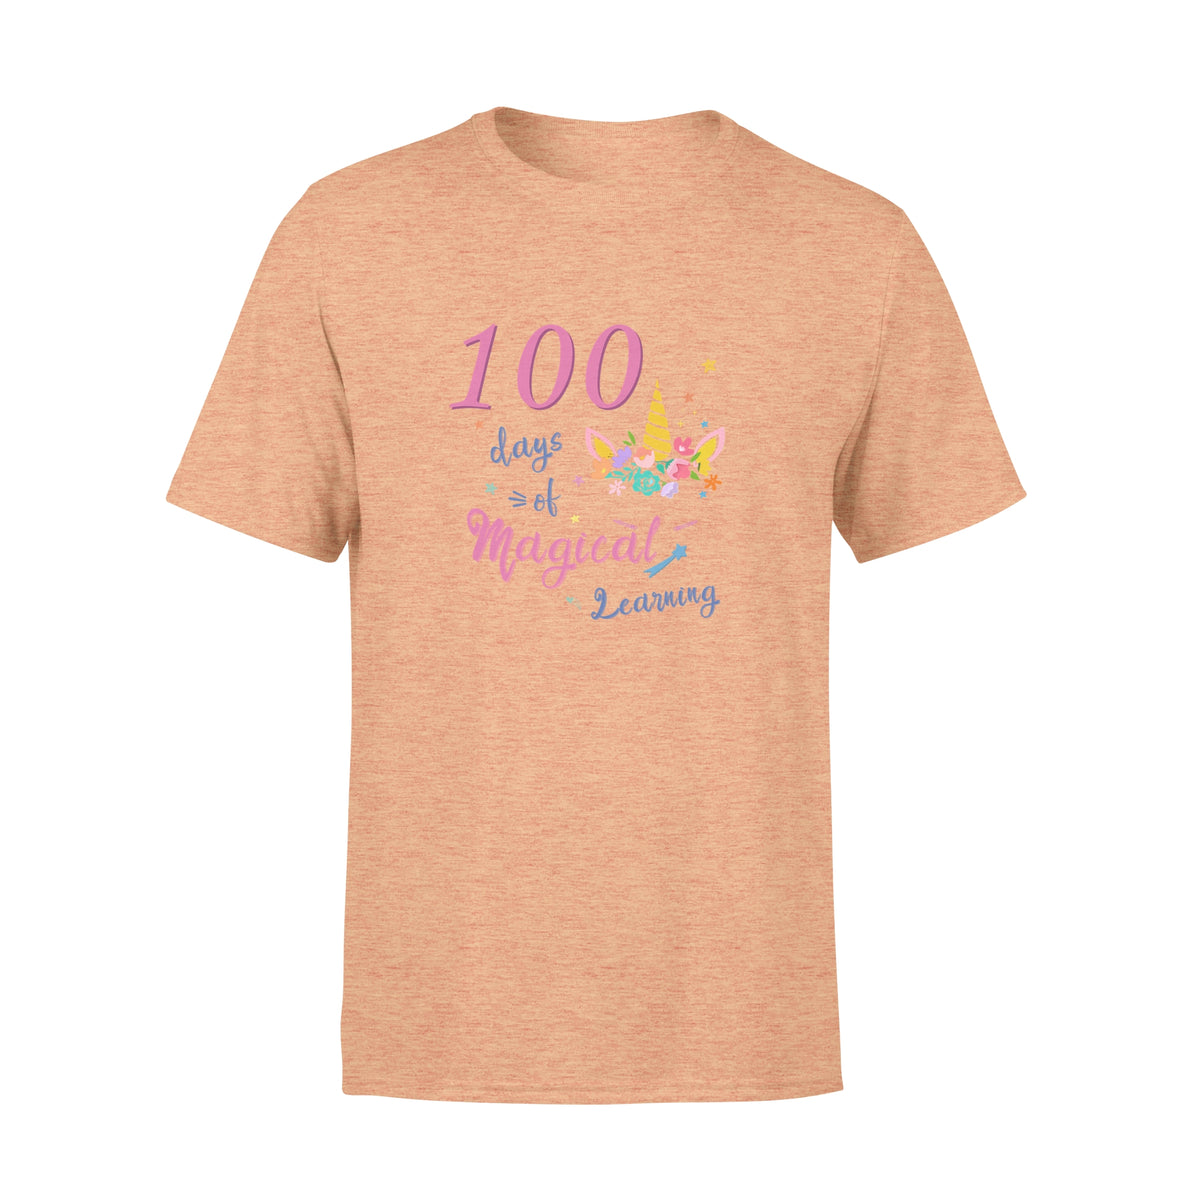 [Man Woman] Happy 100 days of school premium t-shirt ideas for kid kindergarten students - 100 days of magical learning